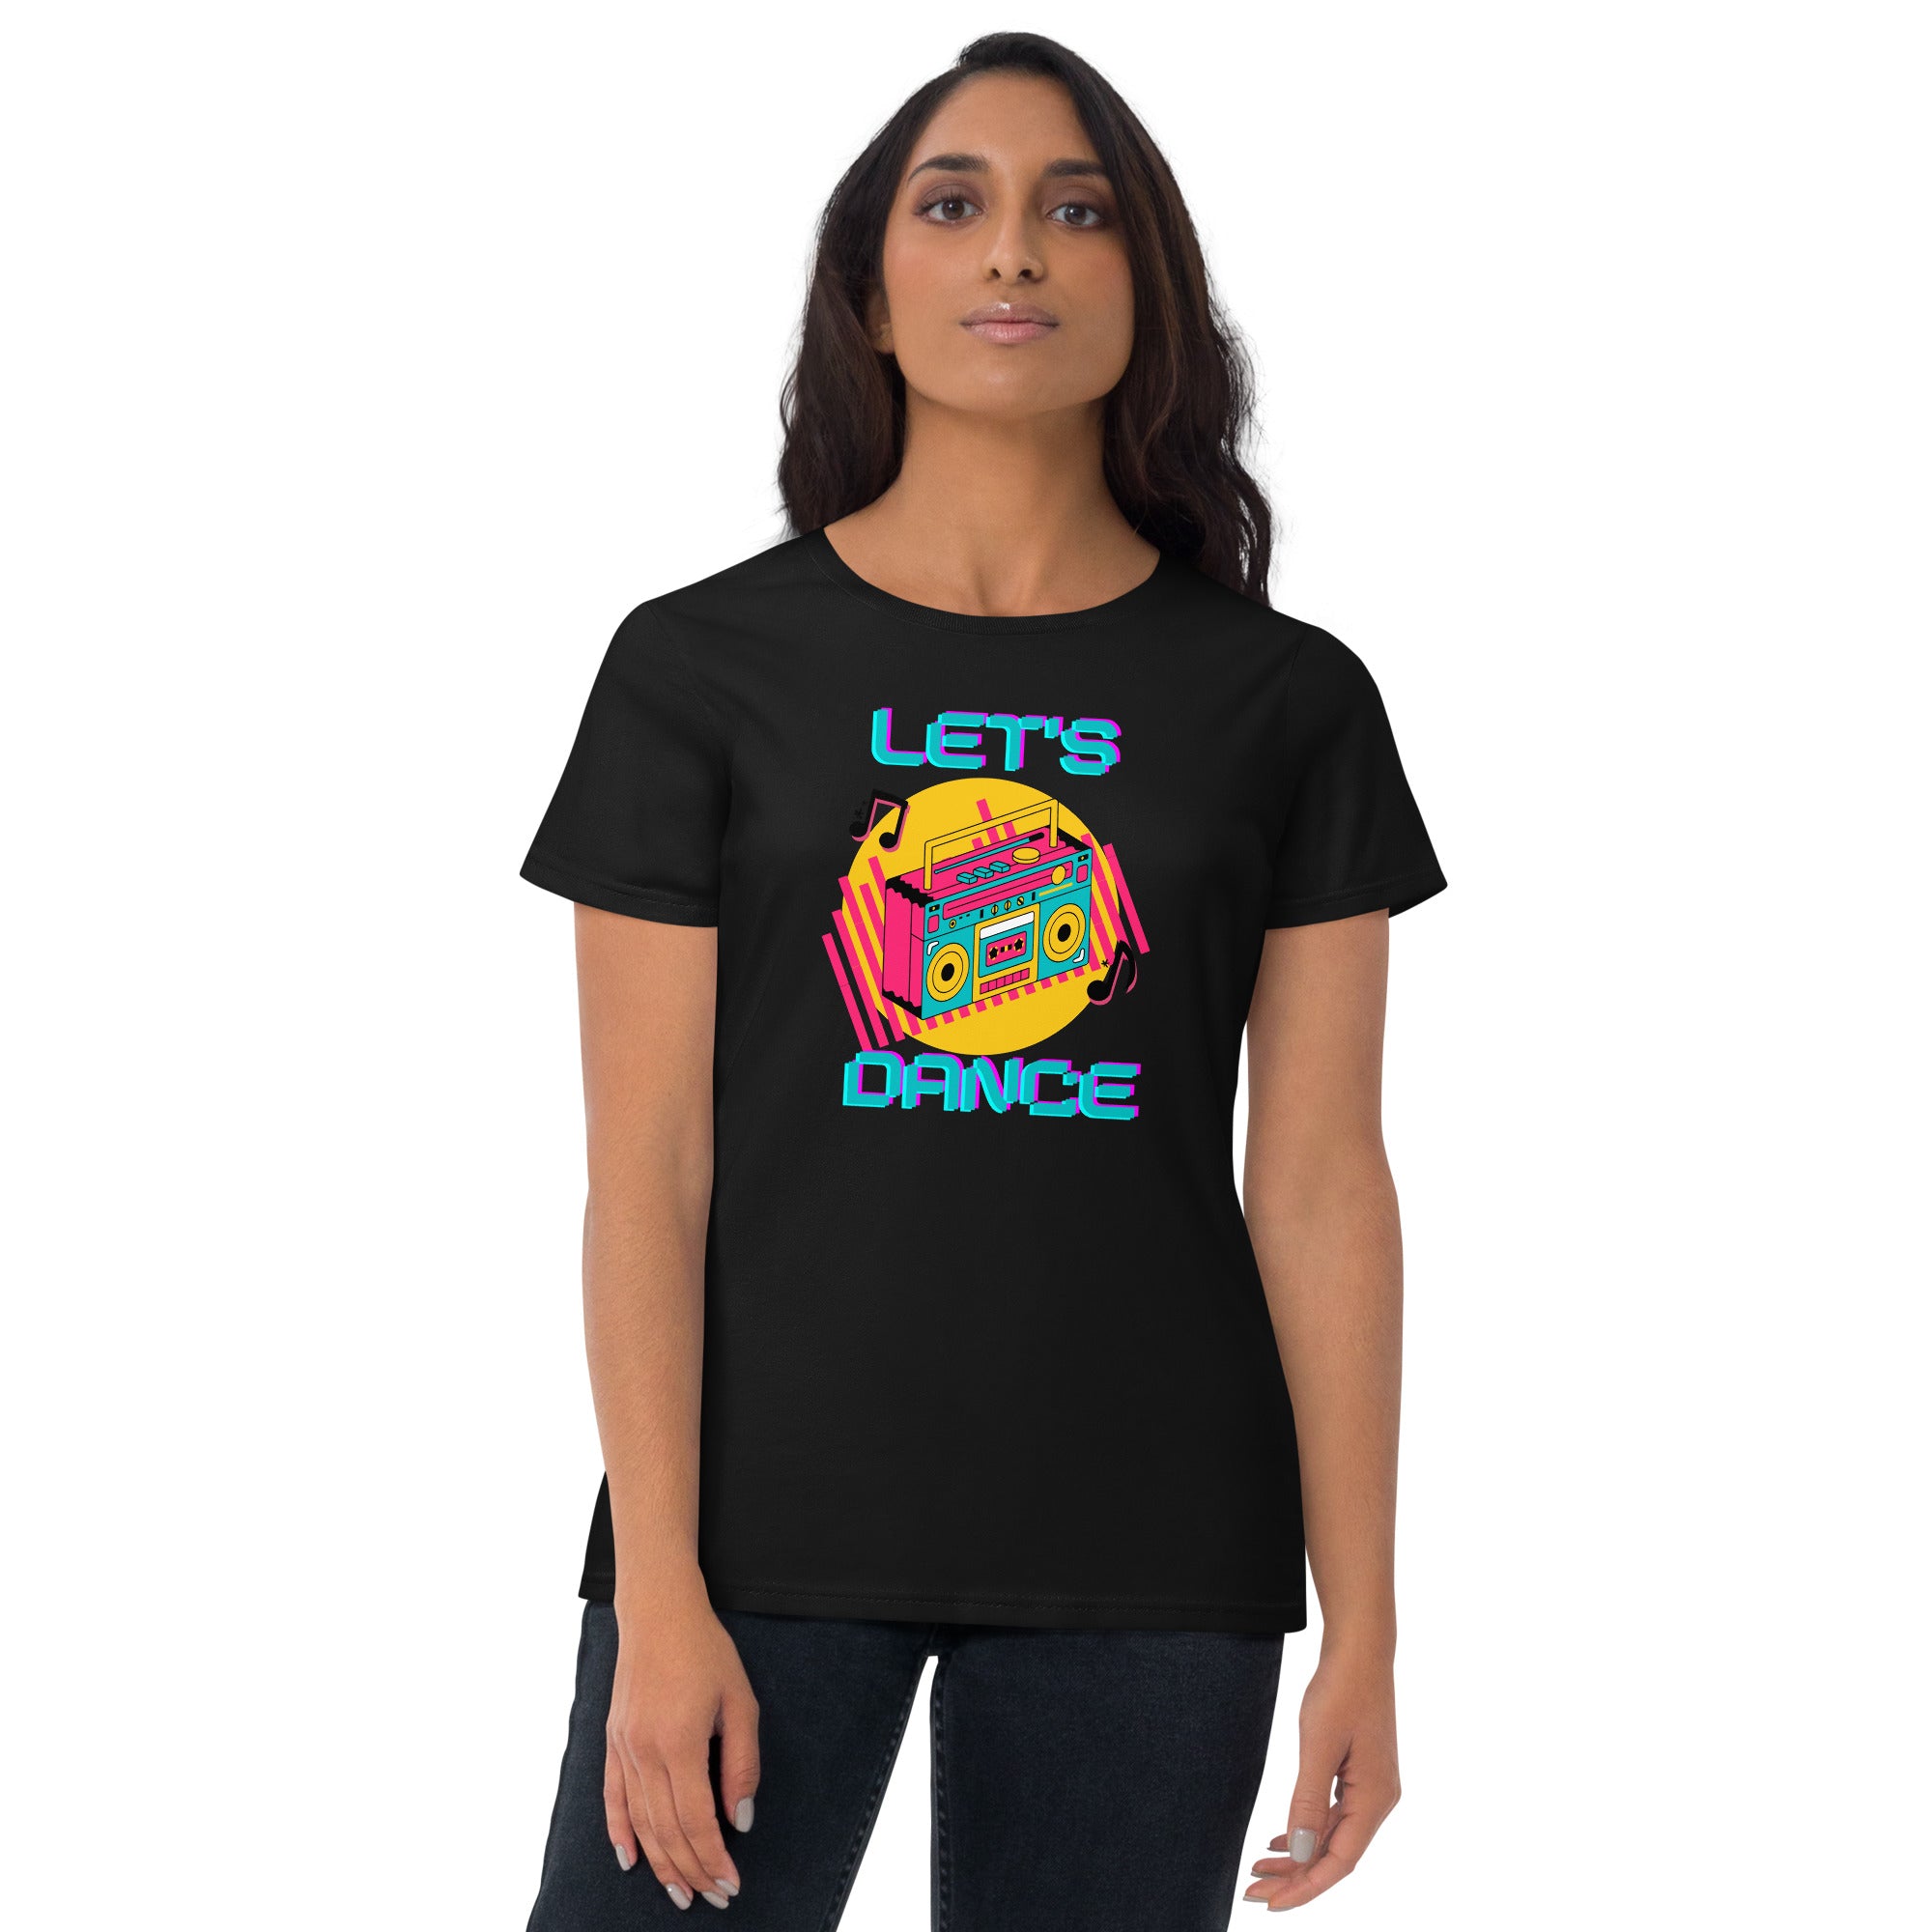 Let's Dance Women's Fitted T-Shirt